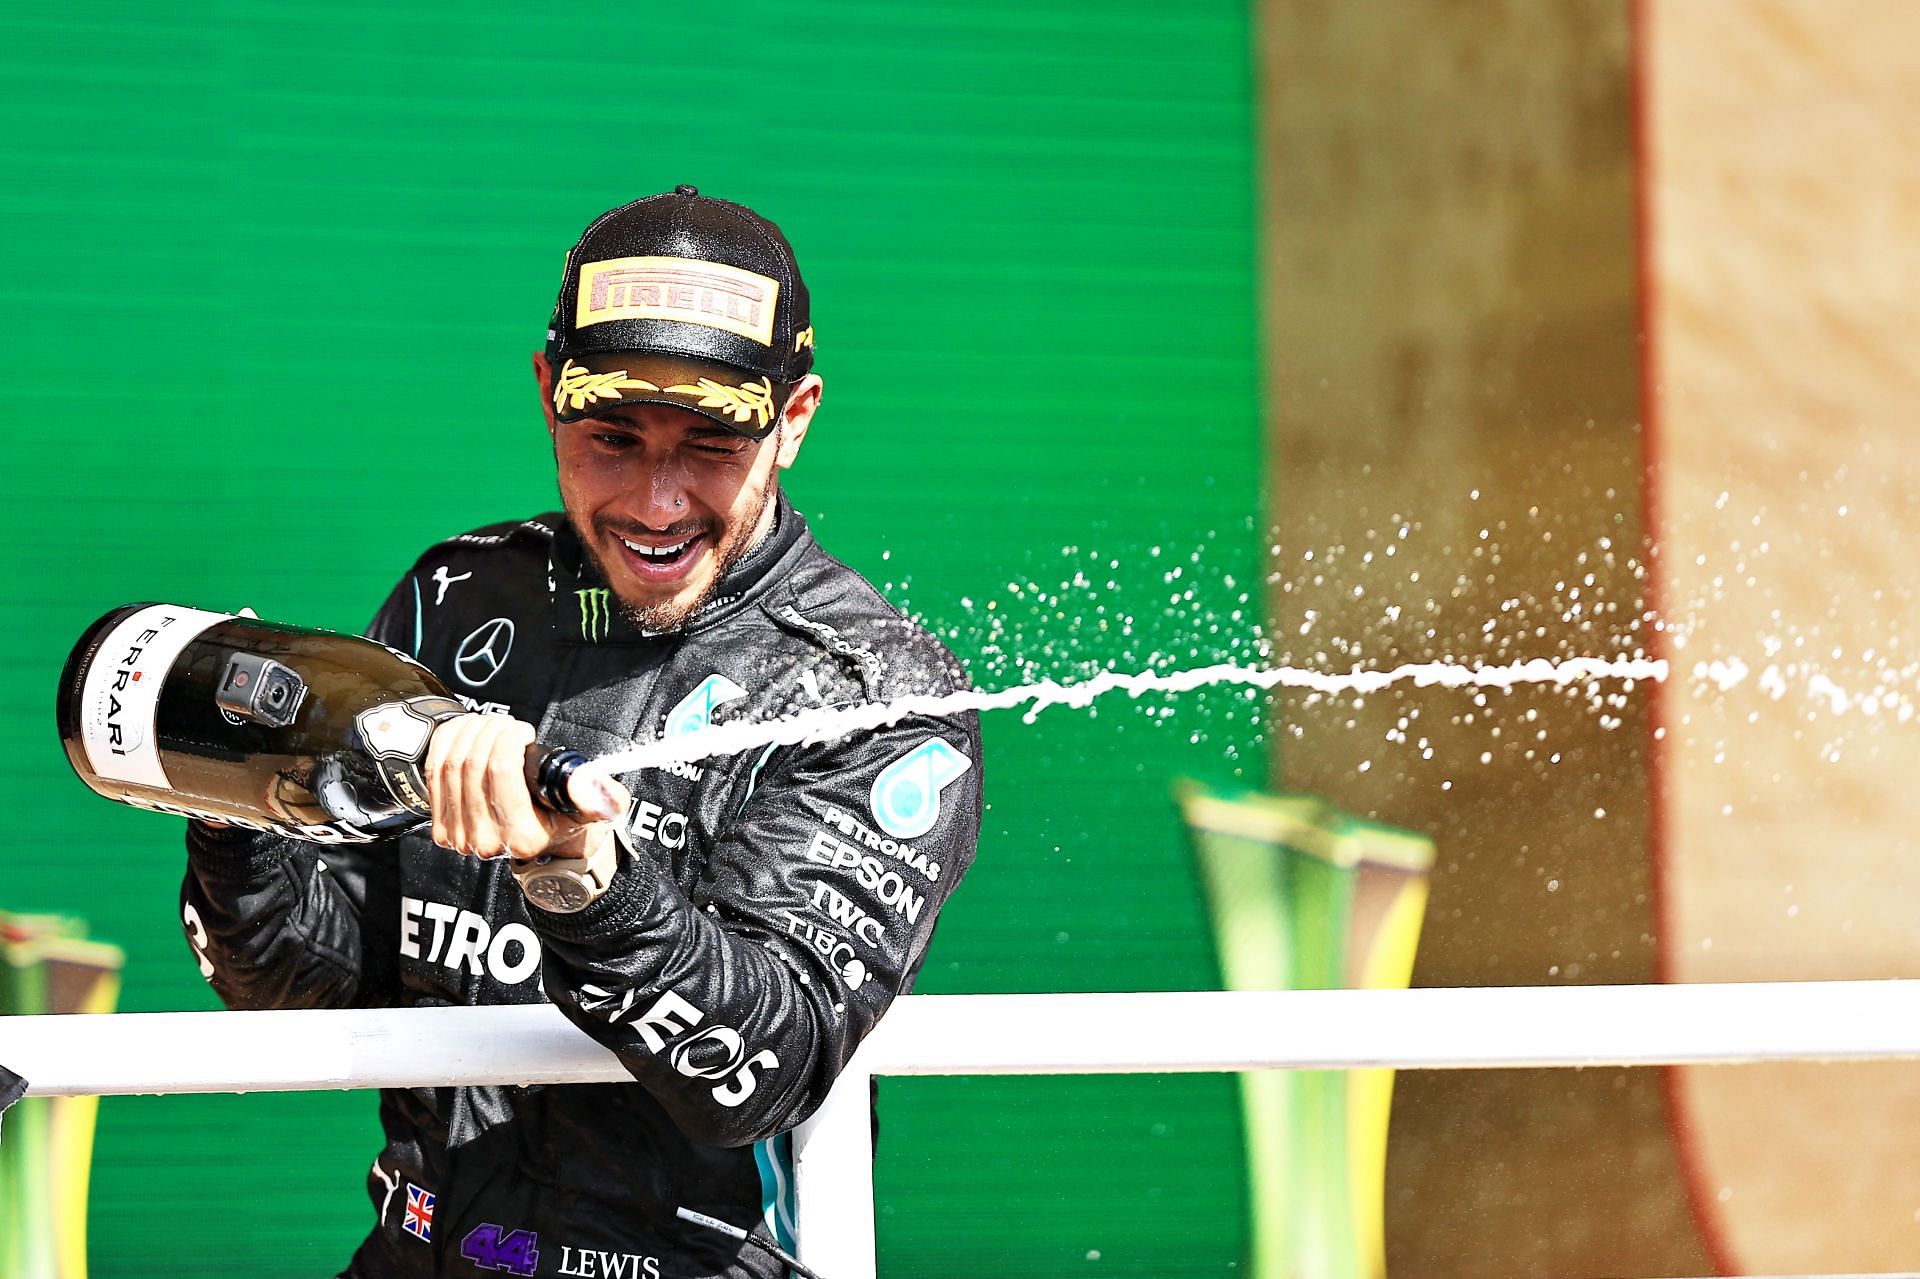 Race winner Lewis Hamilton celebrates on the podium with sparkling wine during the F1 Grand Prix of Brazil. (Photo by Buda Mendes/Getty Images)